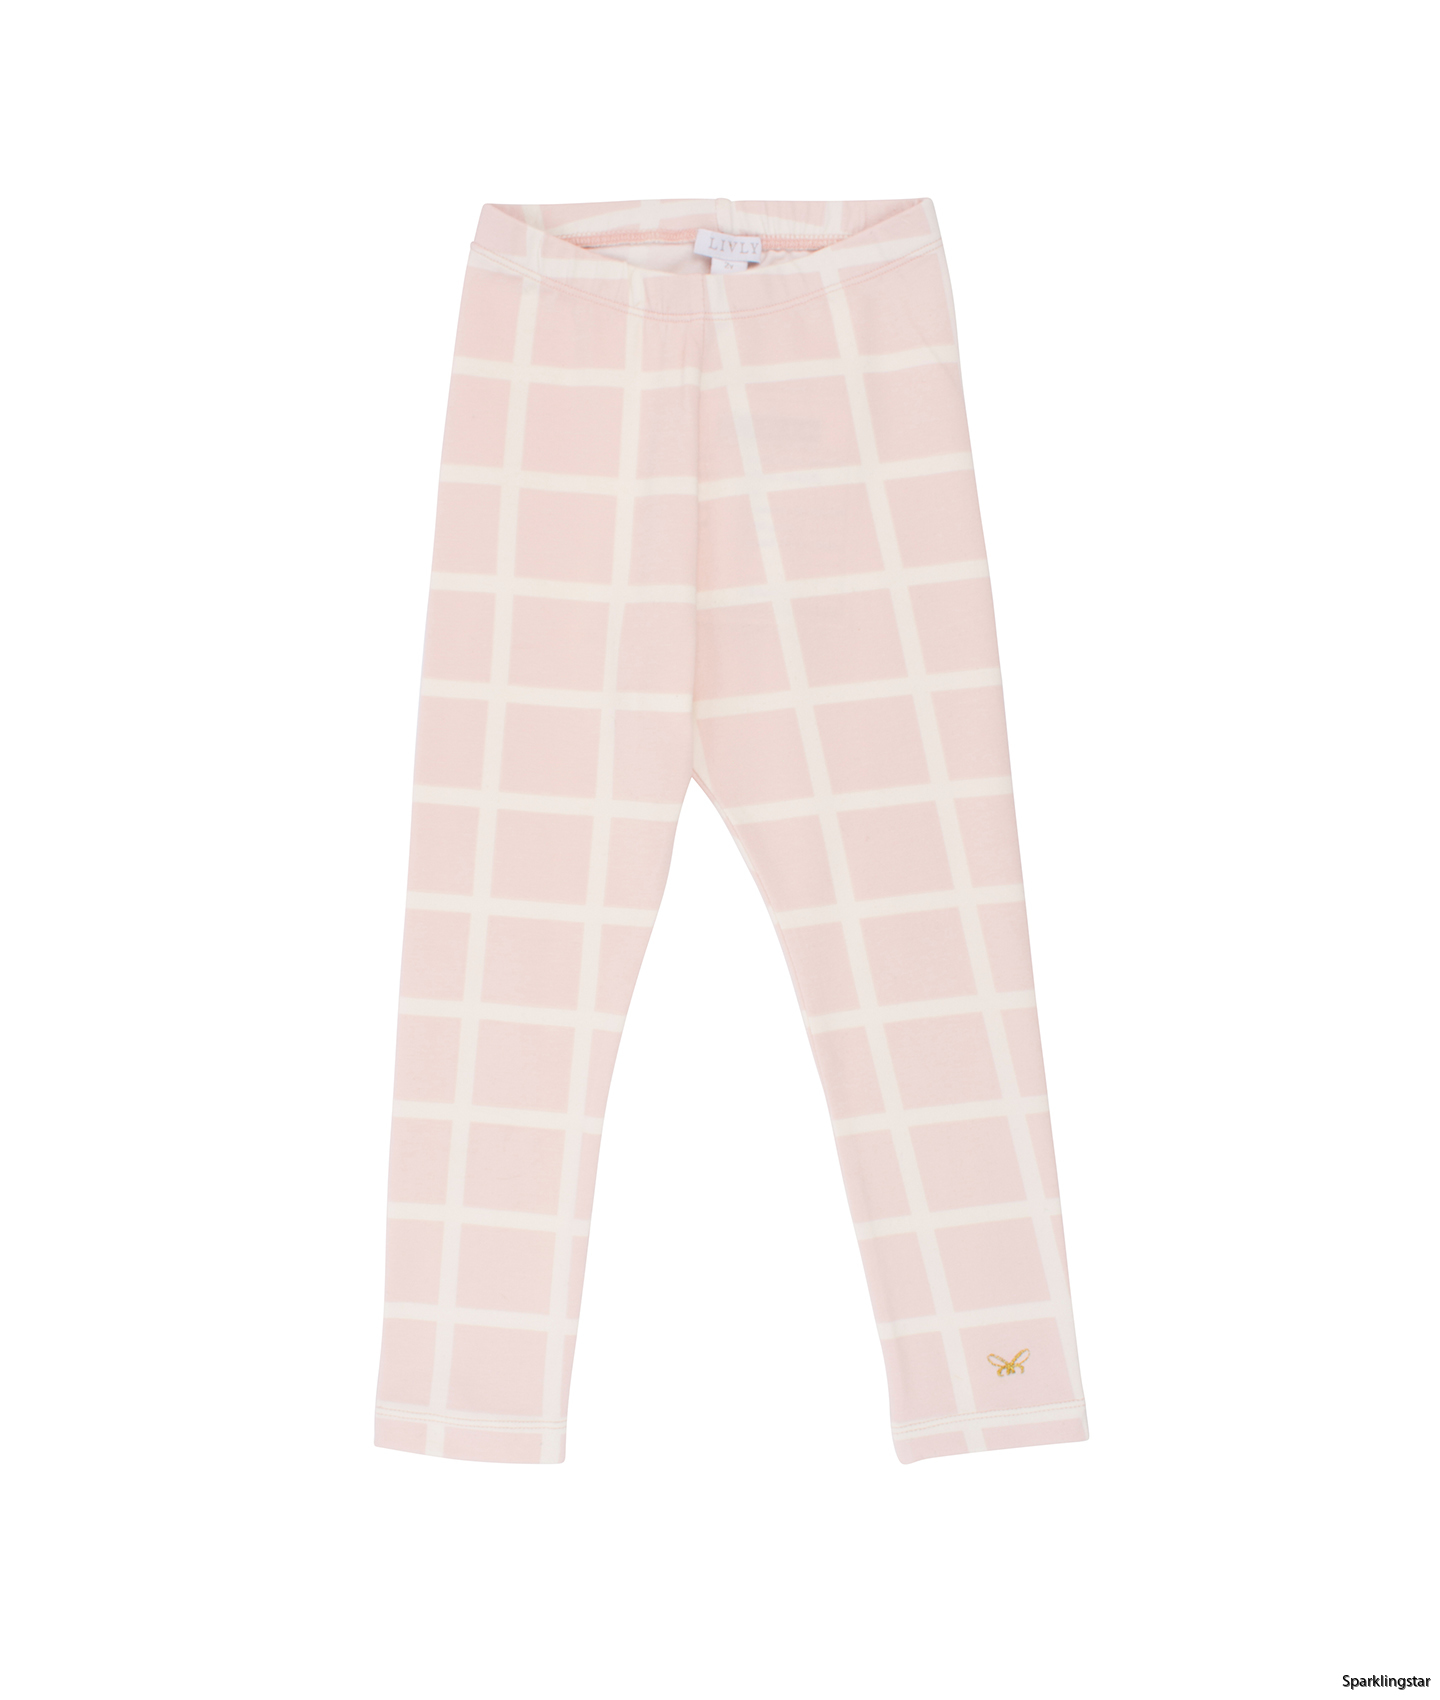 Livly Ivory Squares Essential Pants